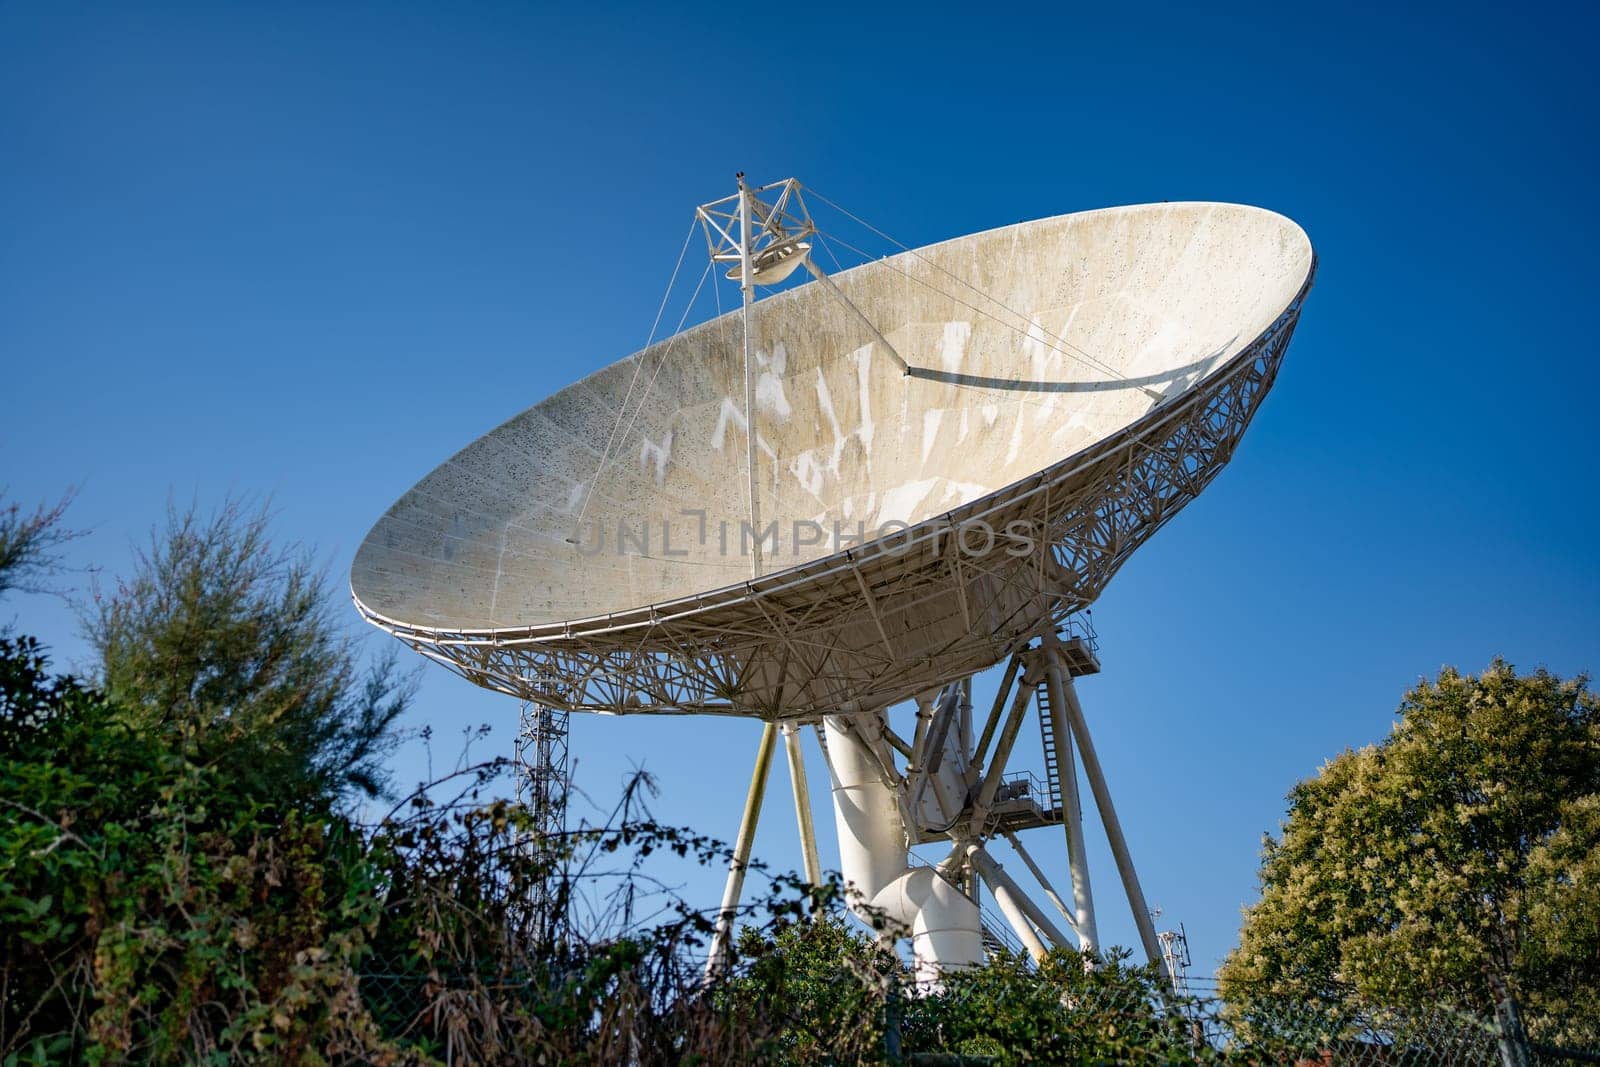 Earth based astronomical radio telescope. Radio telescopes used in science for space observation and distant objects exploring.